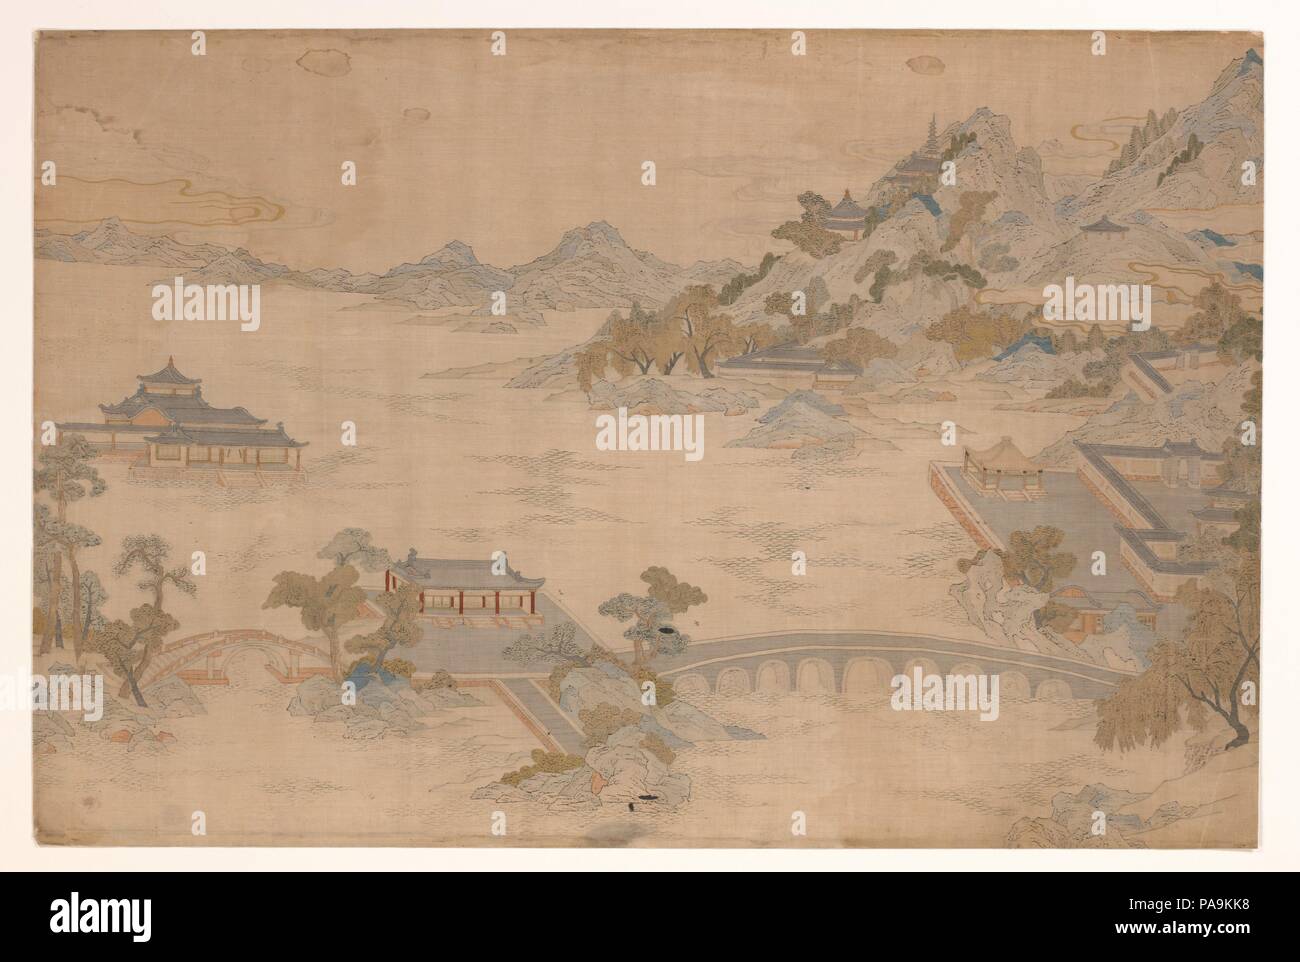 Panel with Landscape. Culture: China. Dimensions: Overall: 23 3/8 x 25 3/16 in. (59.4 x 64 cm). Date: late 18th century.  The scenes on these two panels depict magnificent gardens within green hills overlooking bodies of water. Although we cannot accurately identify them, the buildings and scenery are comparable to those found in eighteenth-century woodblock illustrations of the Old Summer Palace in Beijing and the Mountain Resort in Chengde. It seems likely that these two pieces were once part of a series representing imperial retreats. Museum: Metropolitan Museum of Art, New York, USA. Stock Photo